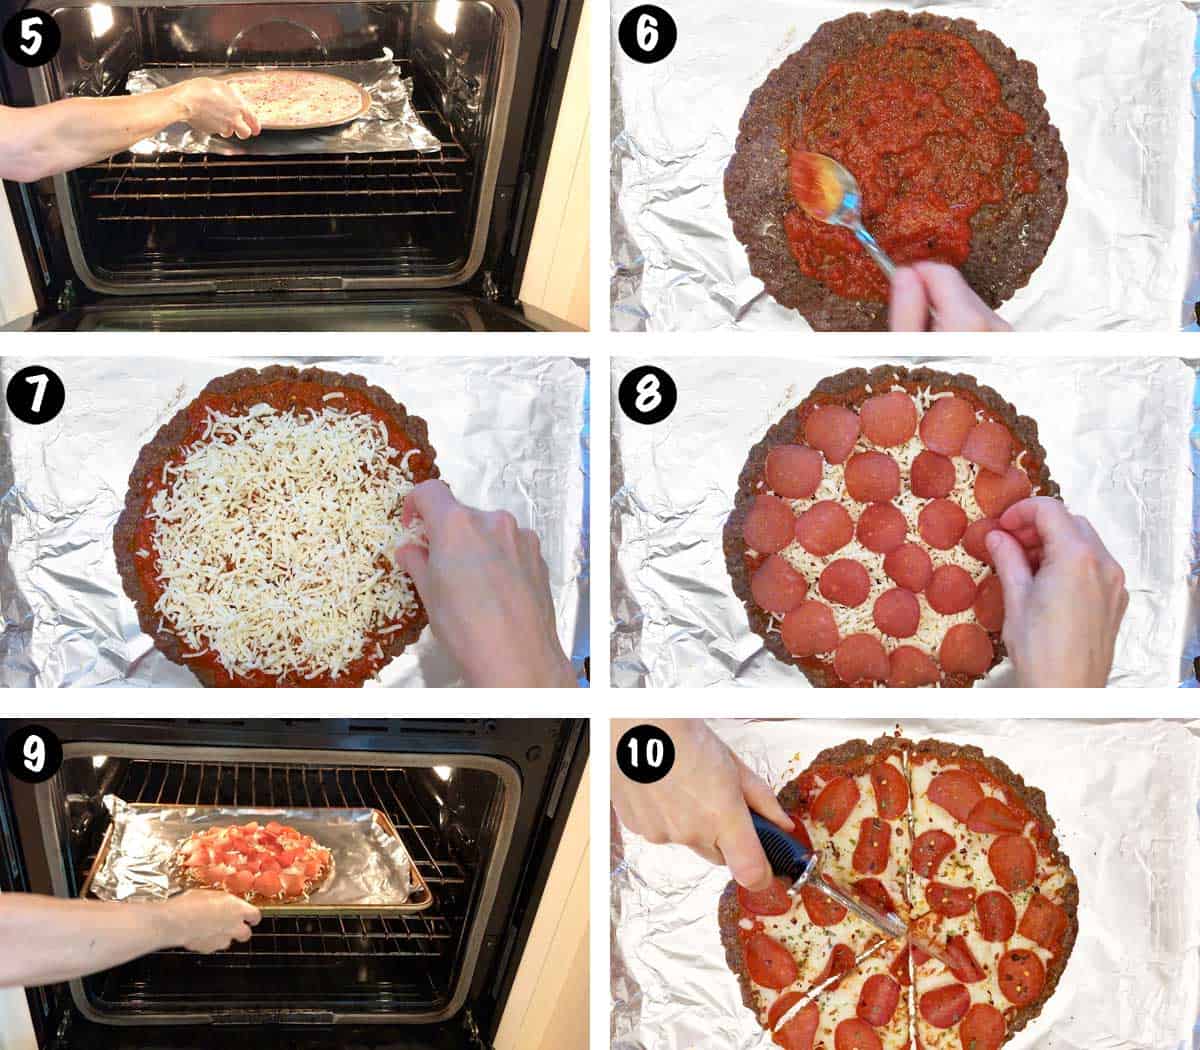 A photo collage showing steps 6-10 for making meatza. 